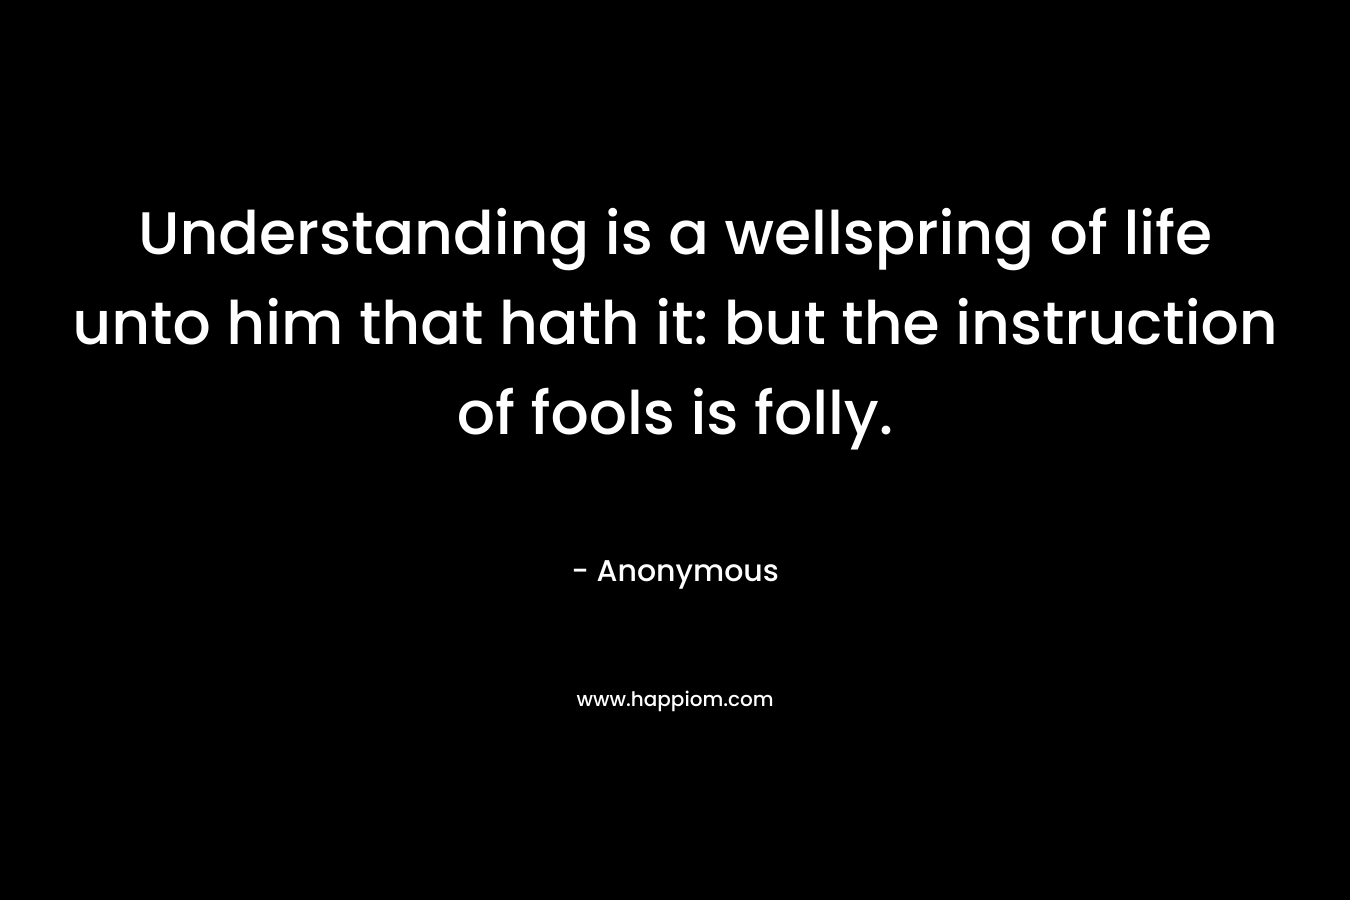 Understanding is a wellspring of life unto him that hath it: but the instruction of fools is folly. – Anonymous